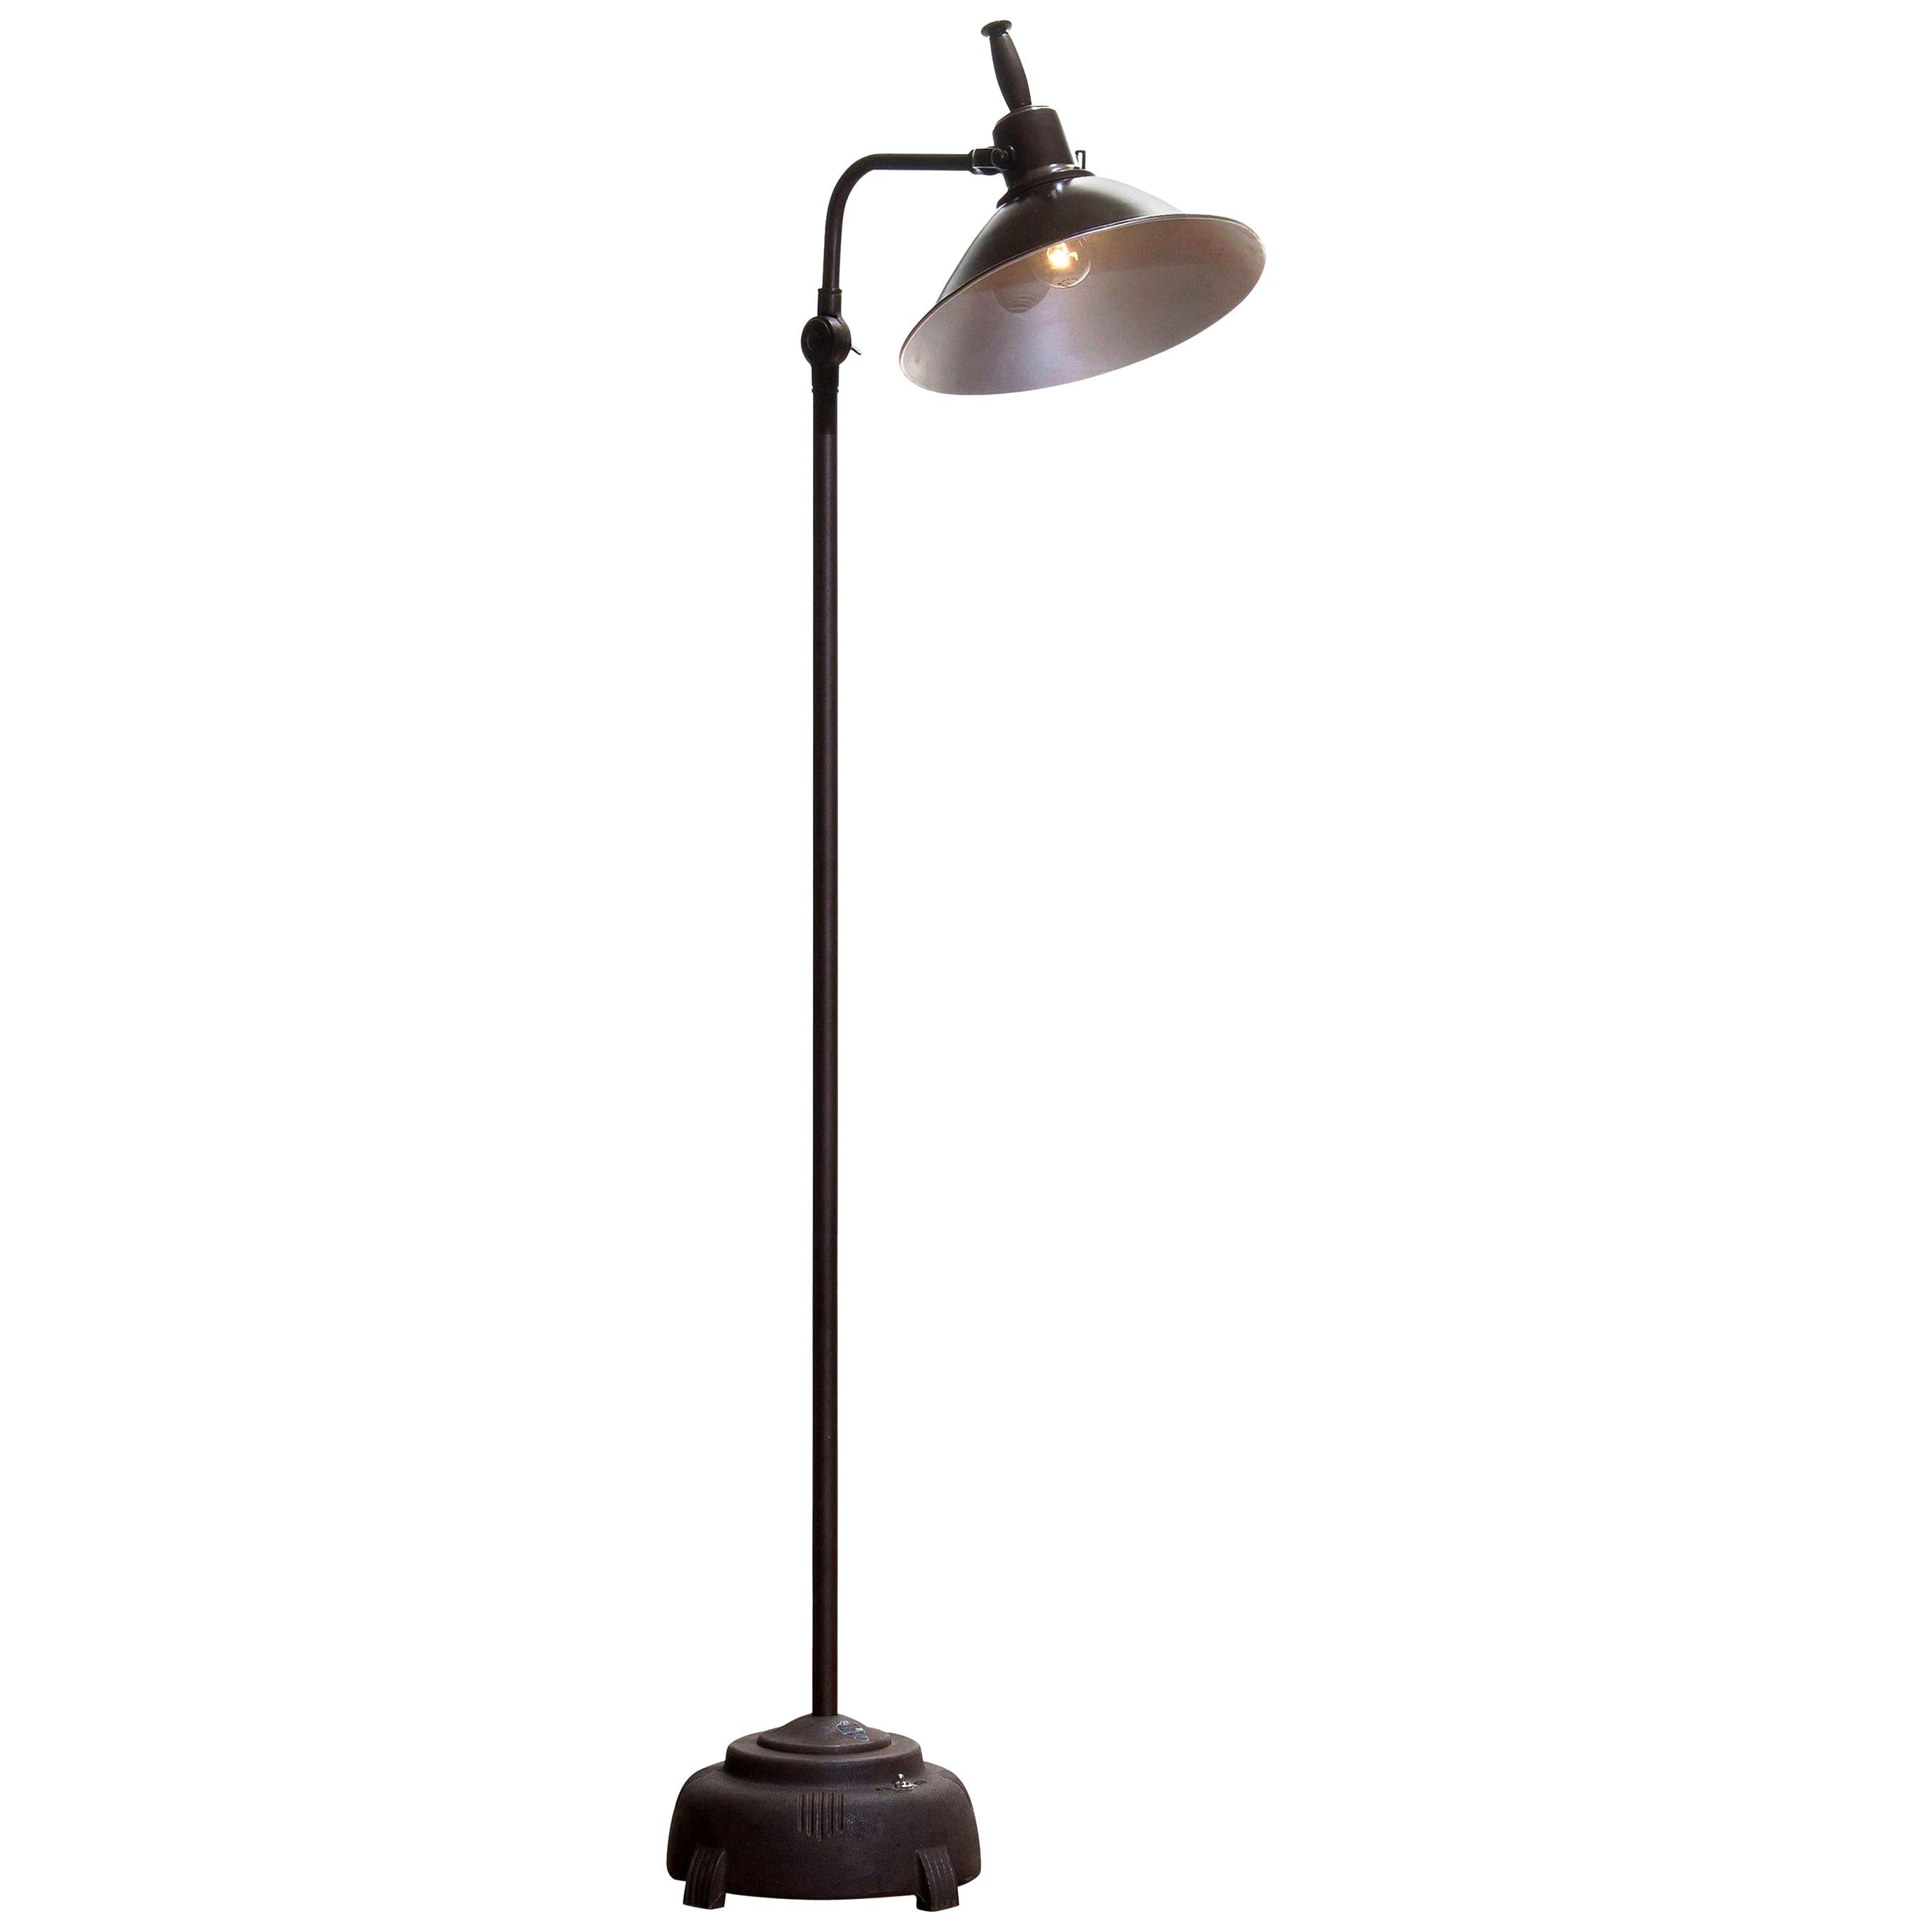 Absolutely amazing an in good condition industrial floor lamp (formal sunlamp) from Faries Manufacturing MFG & Co. made in Illinois USA in brass or cast iron or aluminium!
The lamp is newly wired and therefore suitable for 220 / 110 volts max. 100